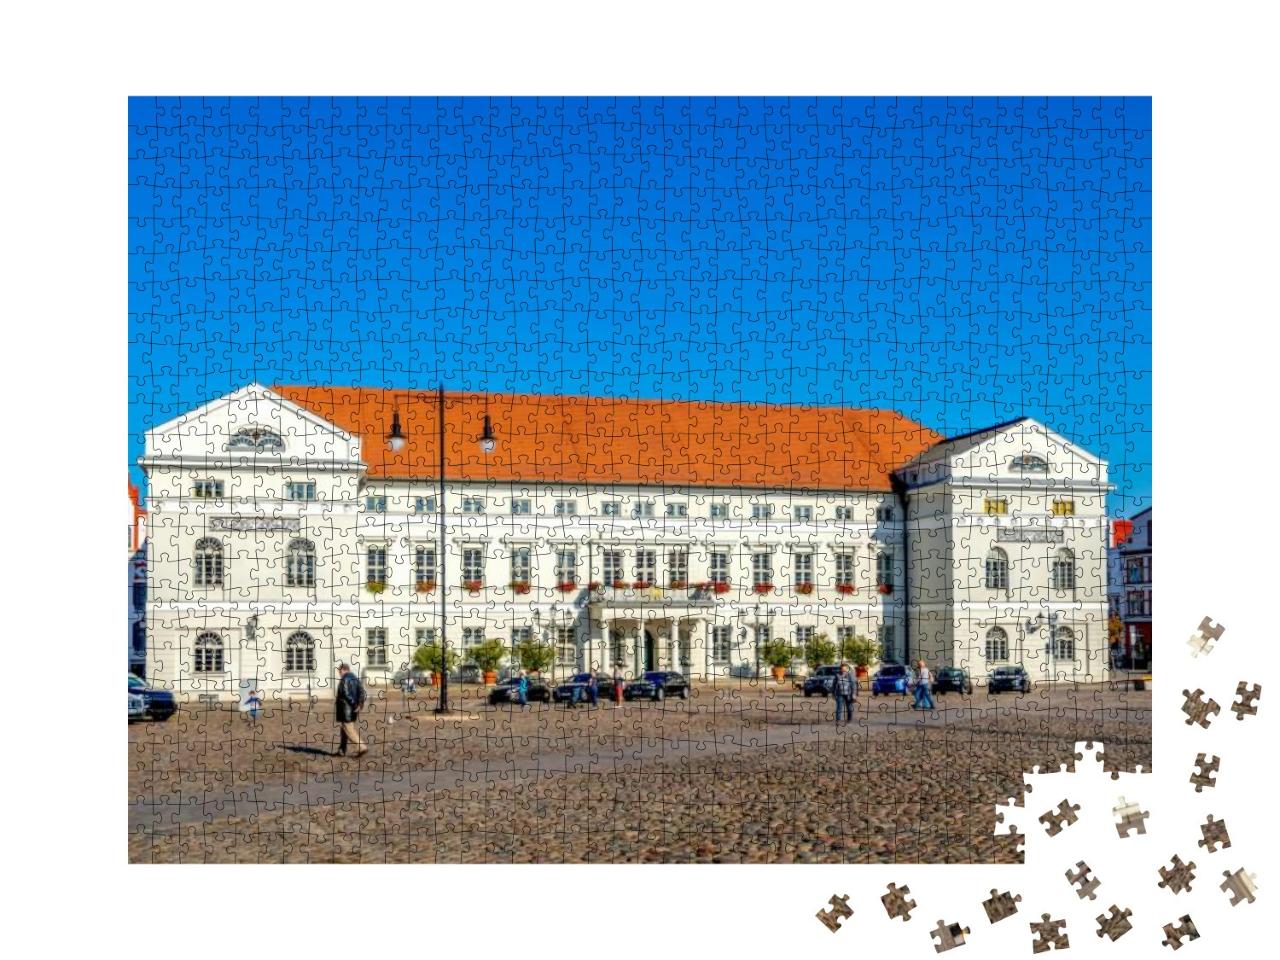 Market & Town Hall in Wismar, Germany... Jigsaw Puzzle with 1000 pieces